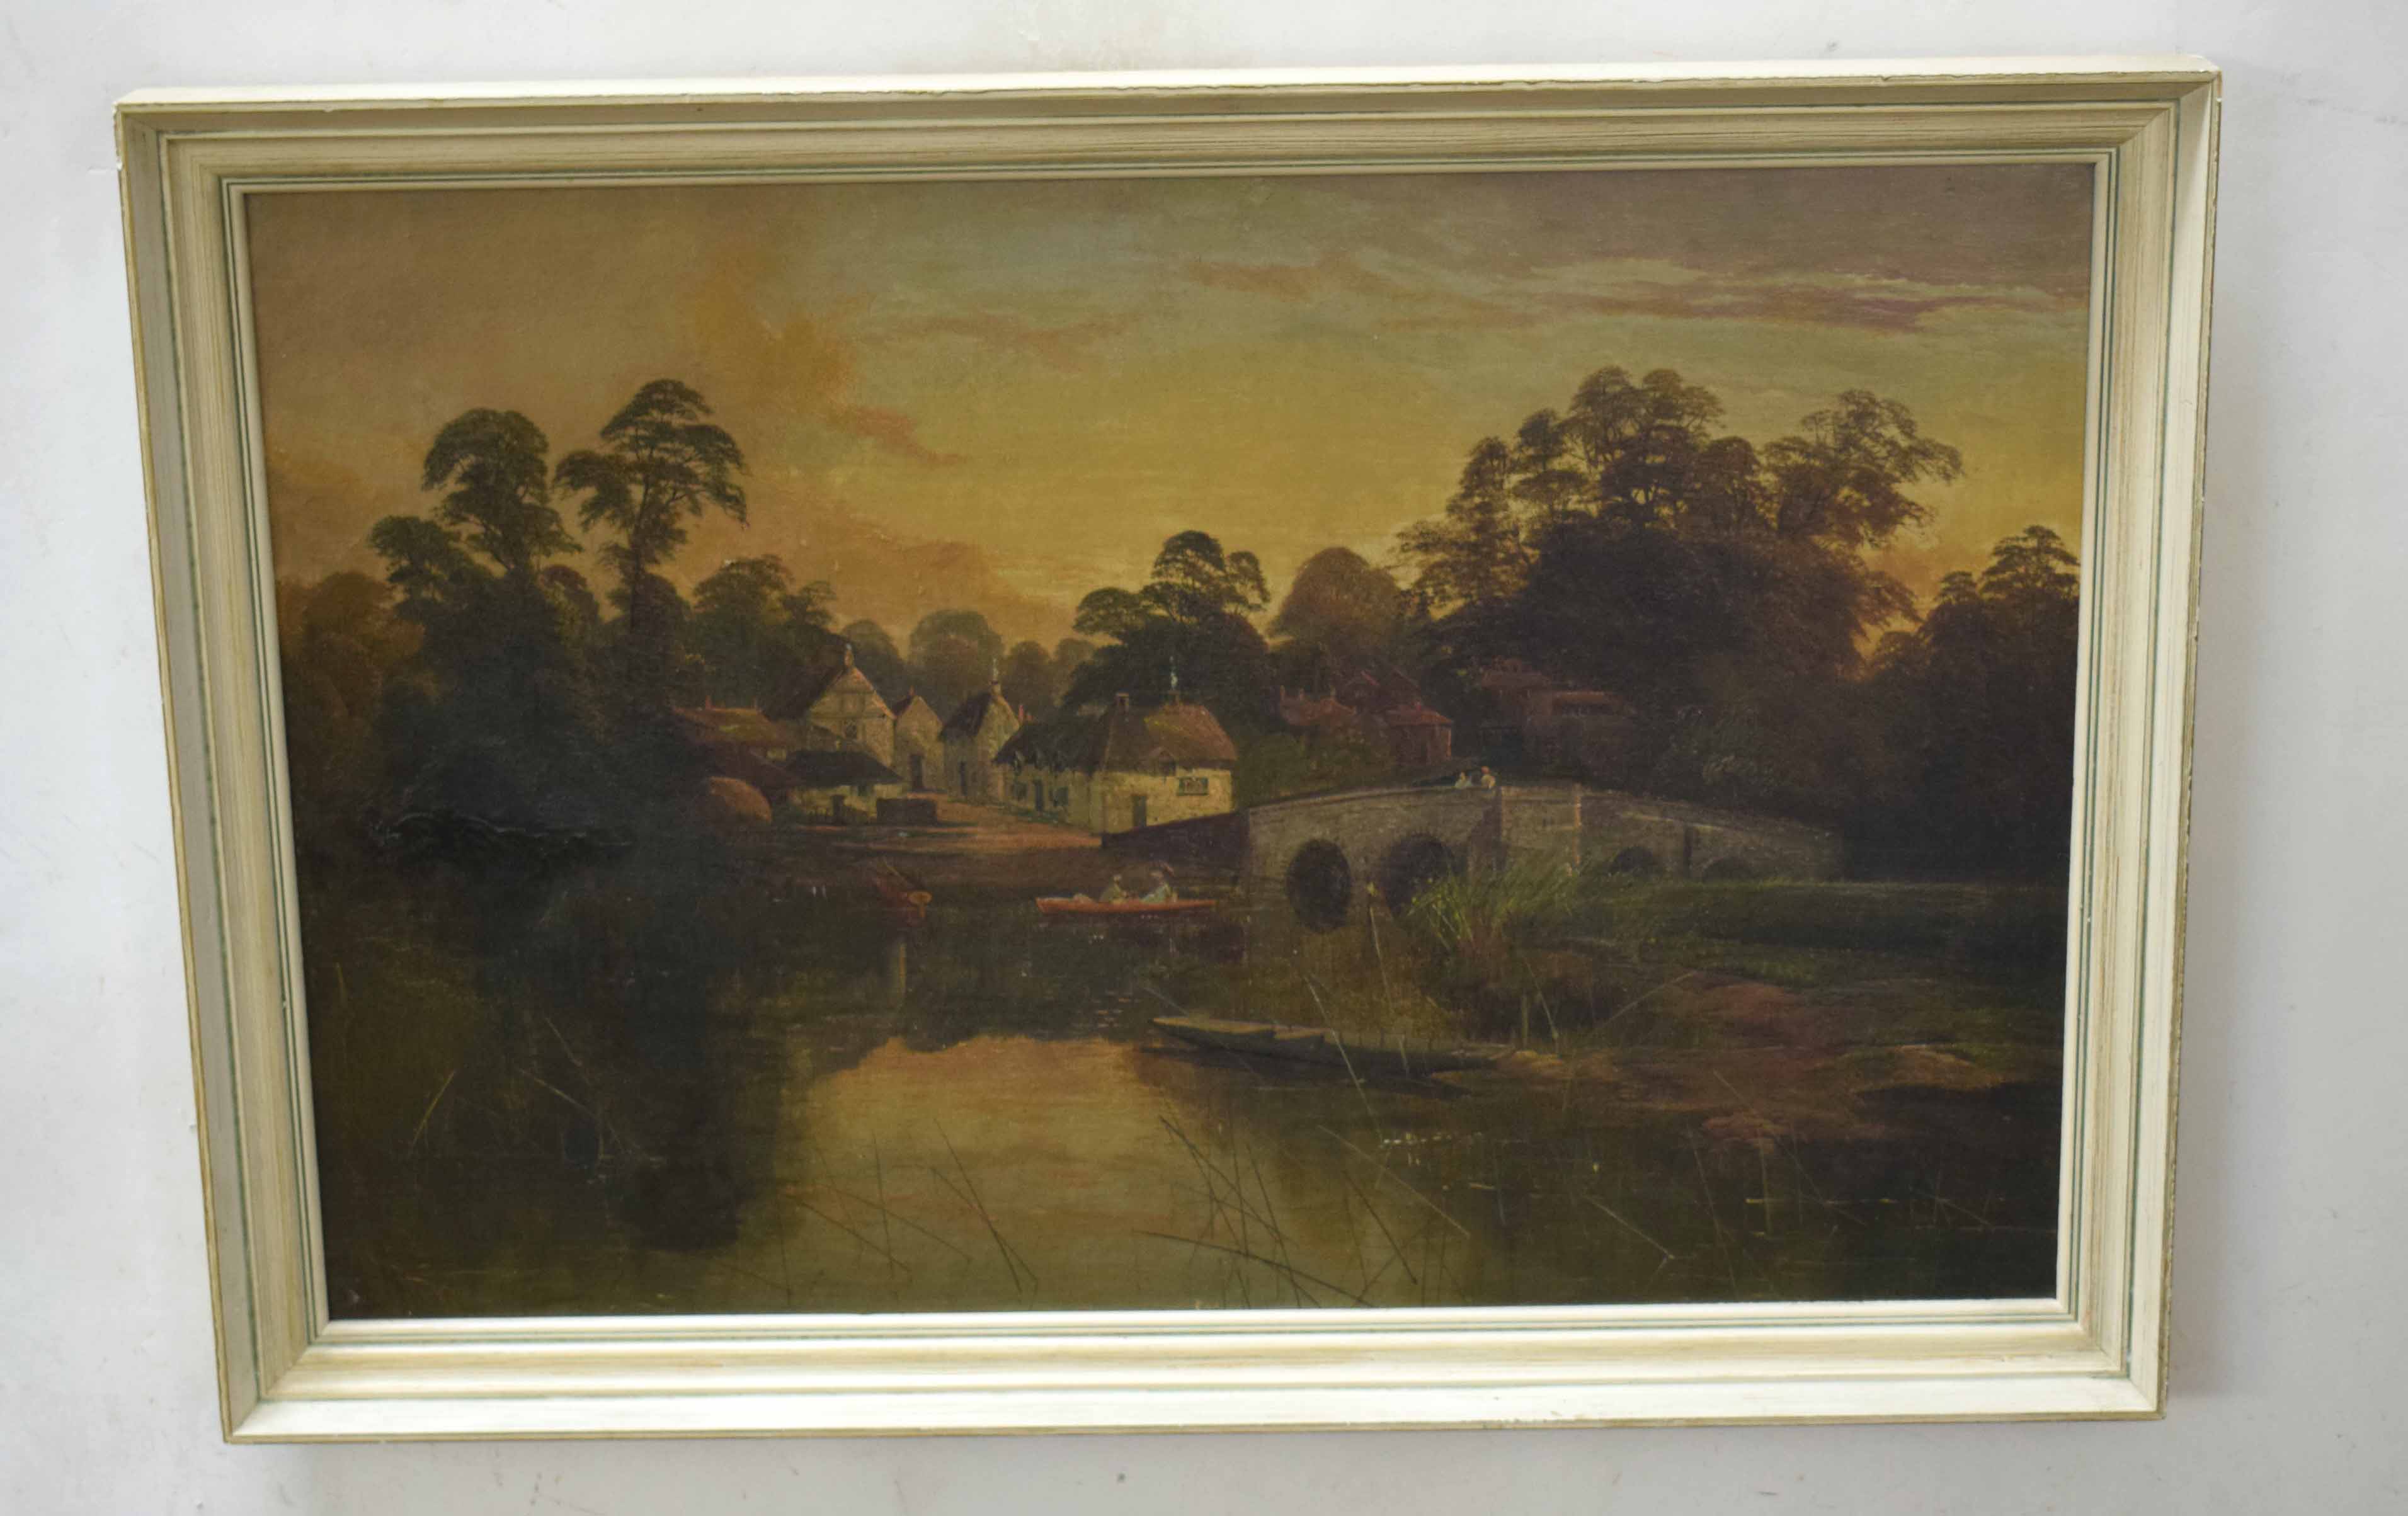 R Allan (19th century) River scenes pair of oils on canvas, both signed, 39 x 59cm (2) - Image 2 of 2